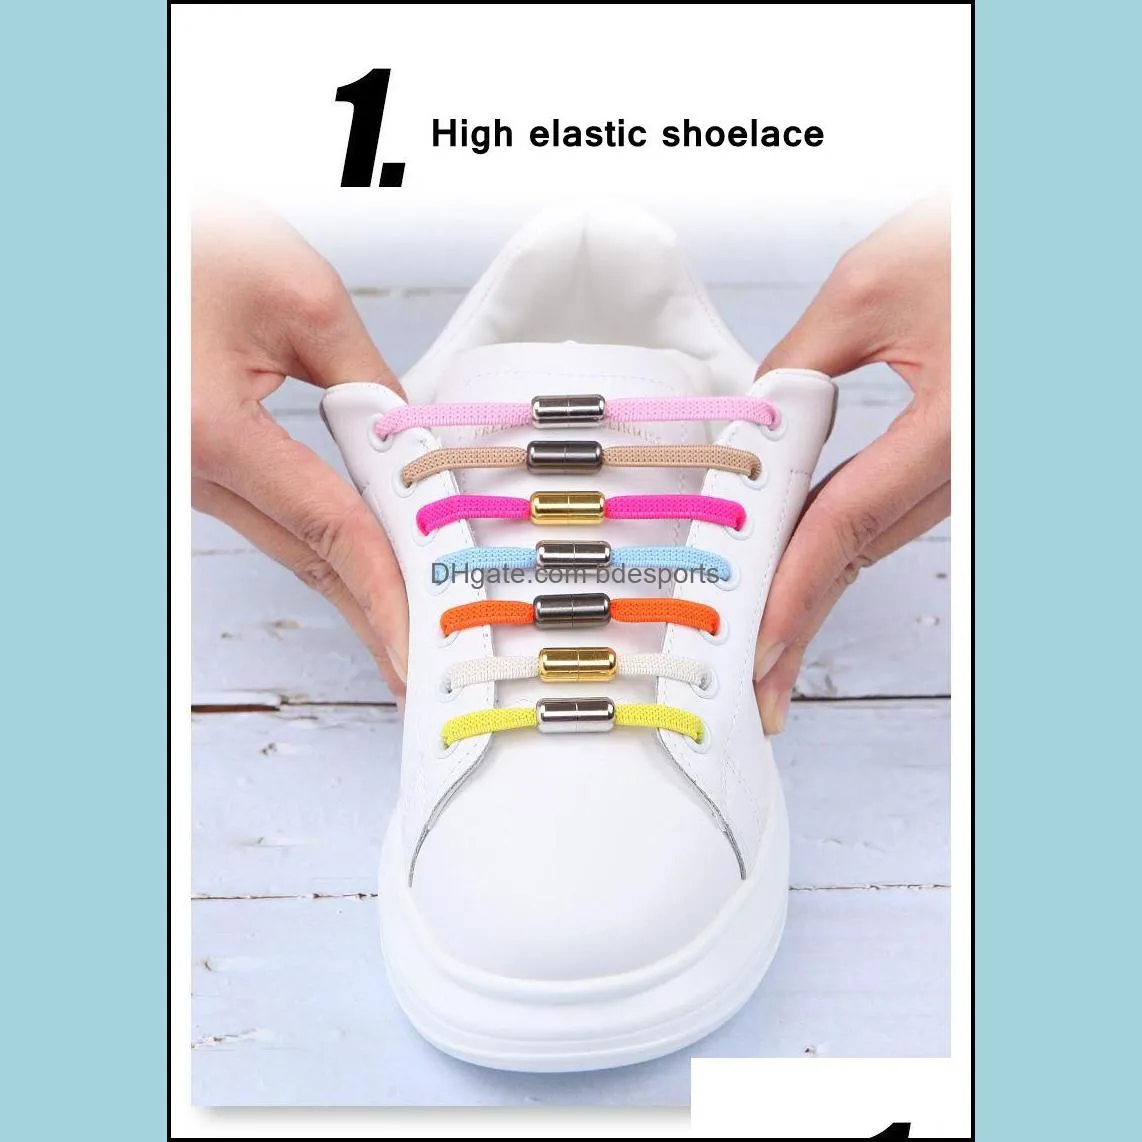 No Tie Shoe lace Flat Elastic Shoelaces Kids Adult Sneakers Safety Lazy Laces Unisex Fashion Fast Metal Lock